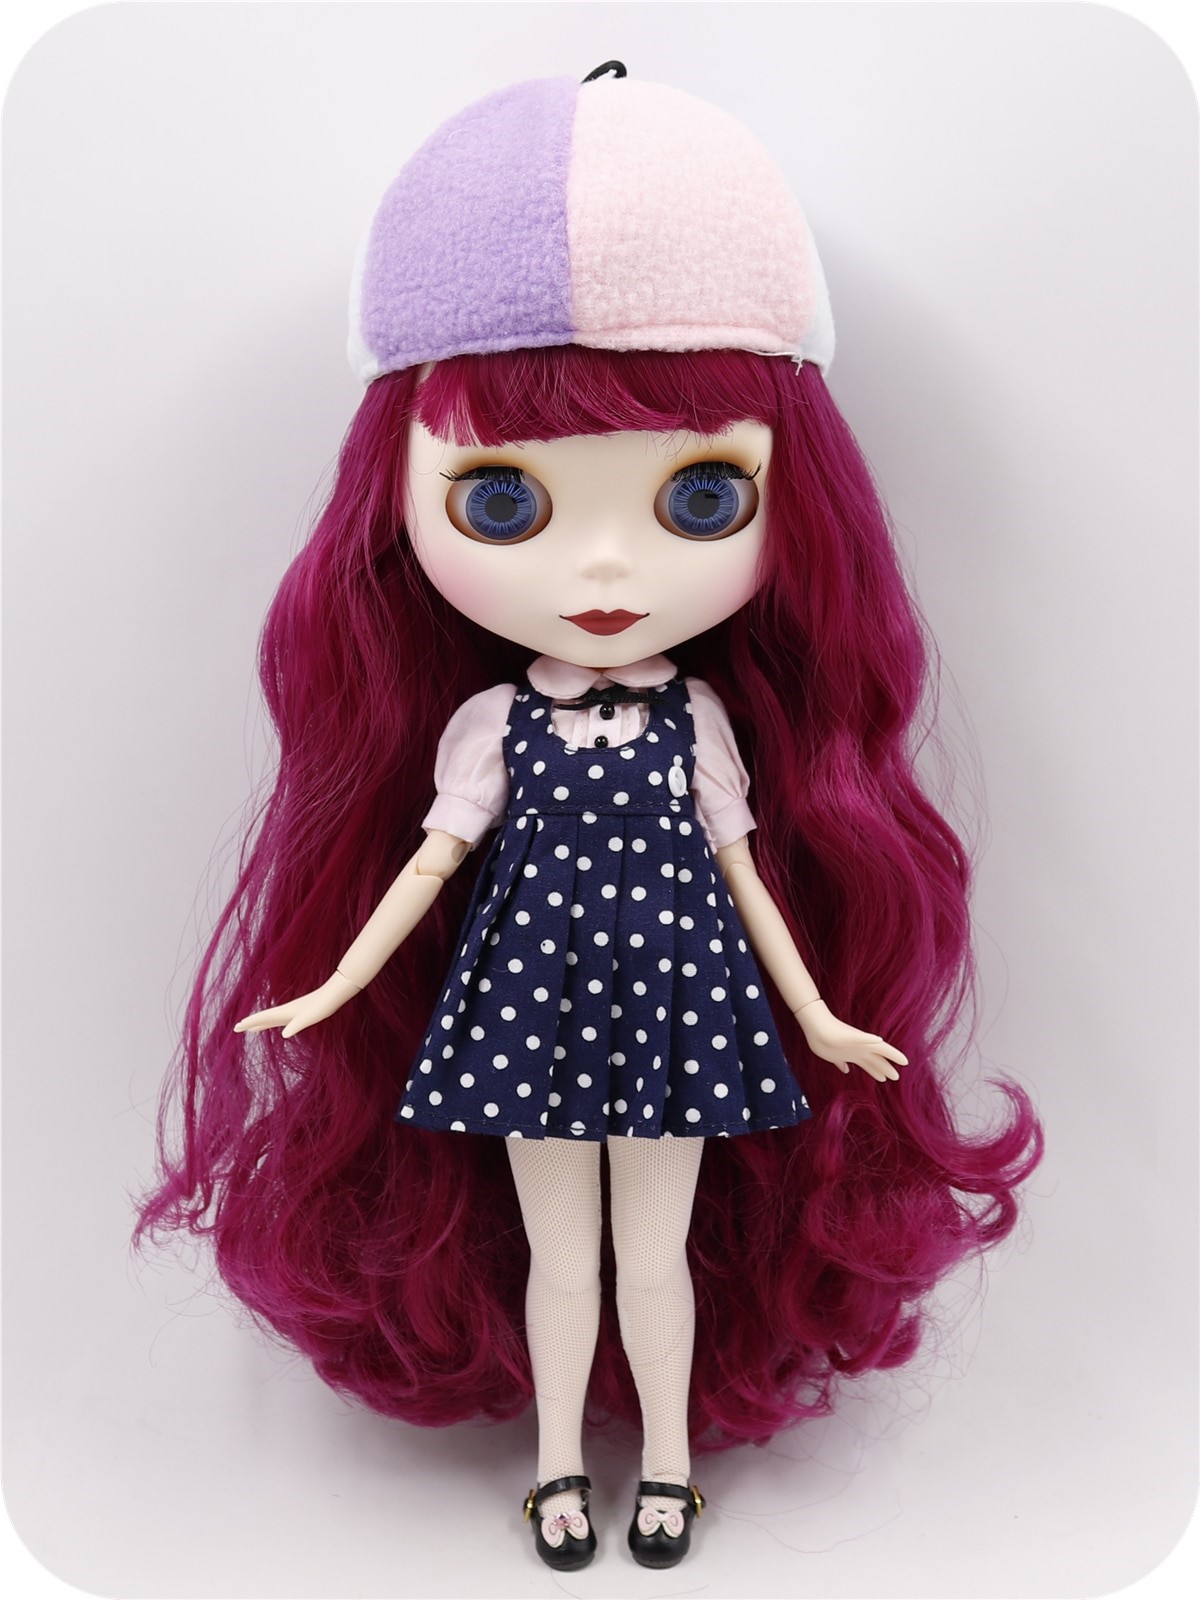 Neo Blythe Doll Blue Polka Dot Dress with Hat & Stockings Neo Blythe Doll Clothes